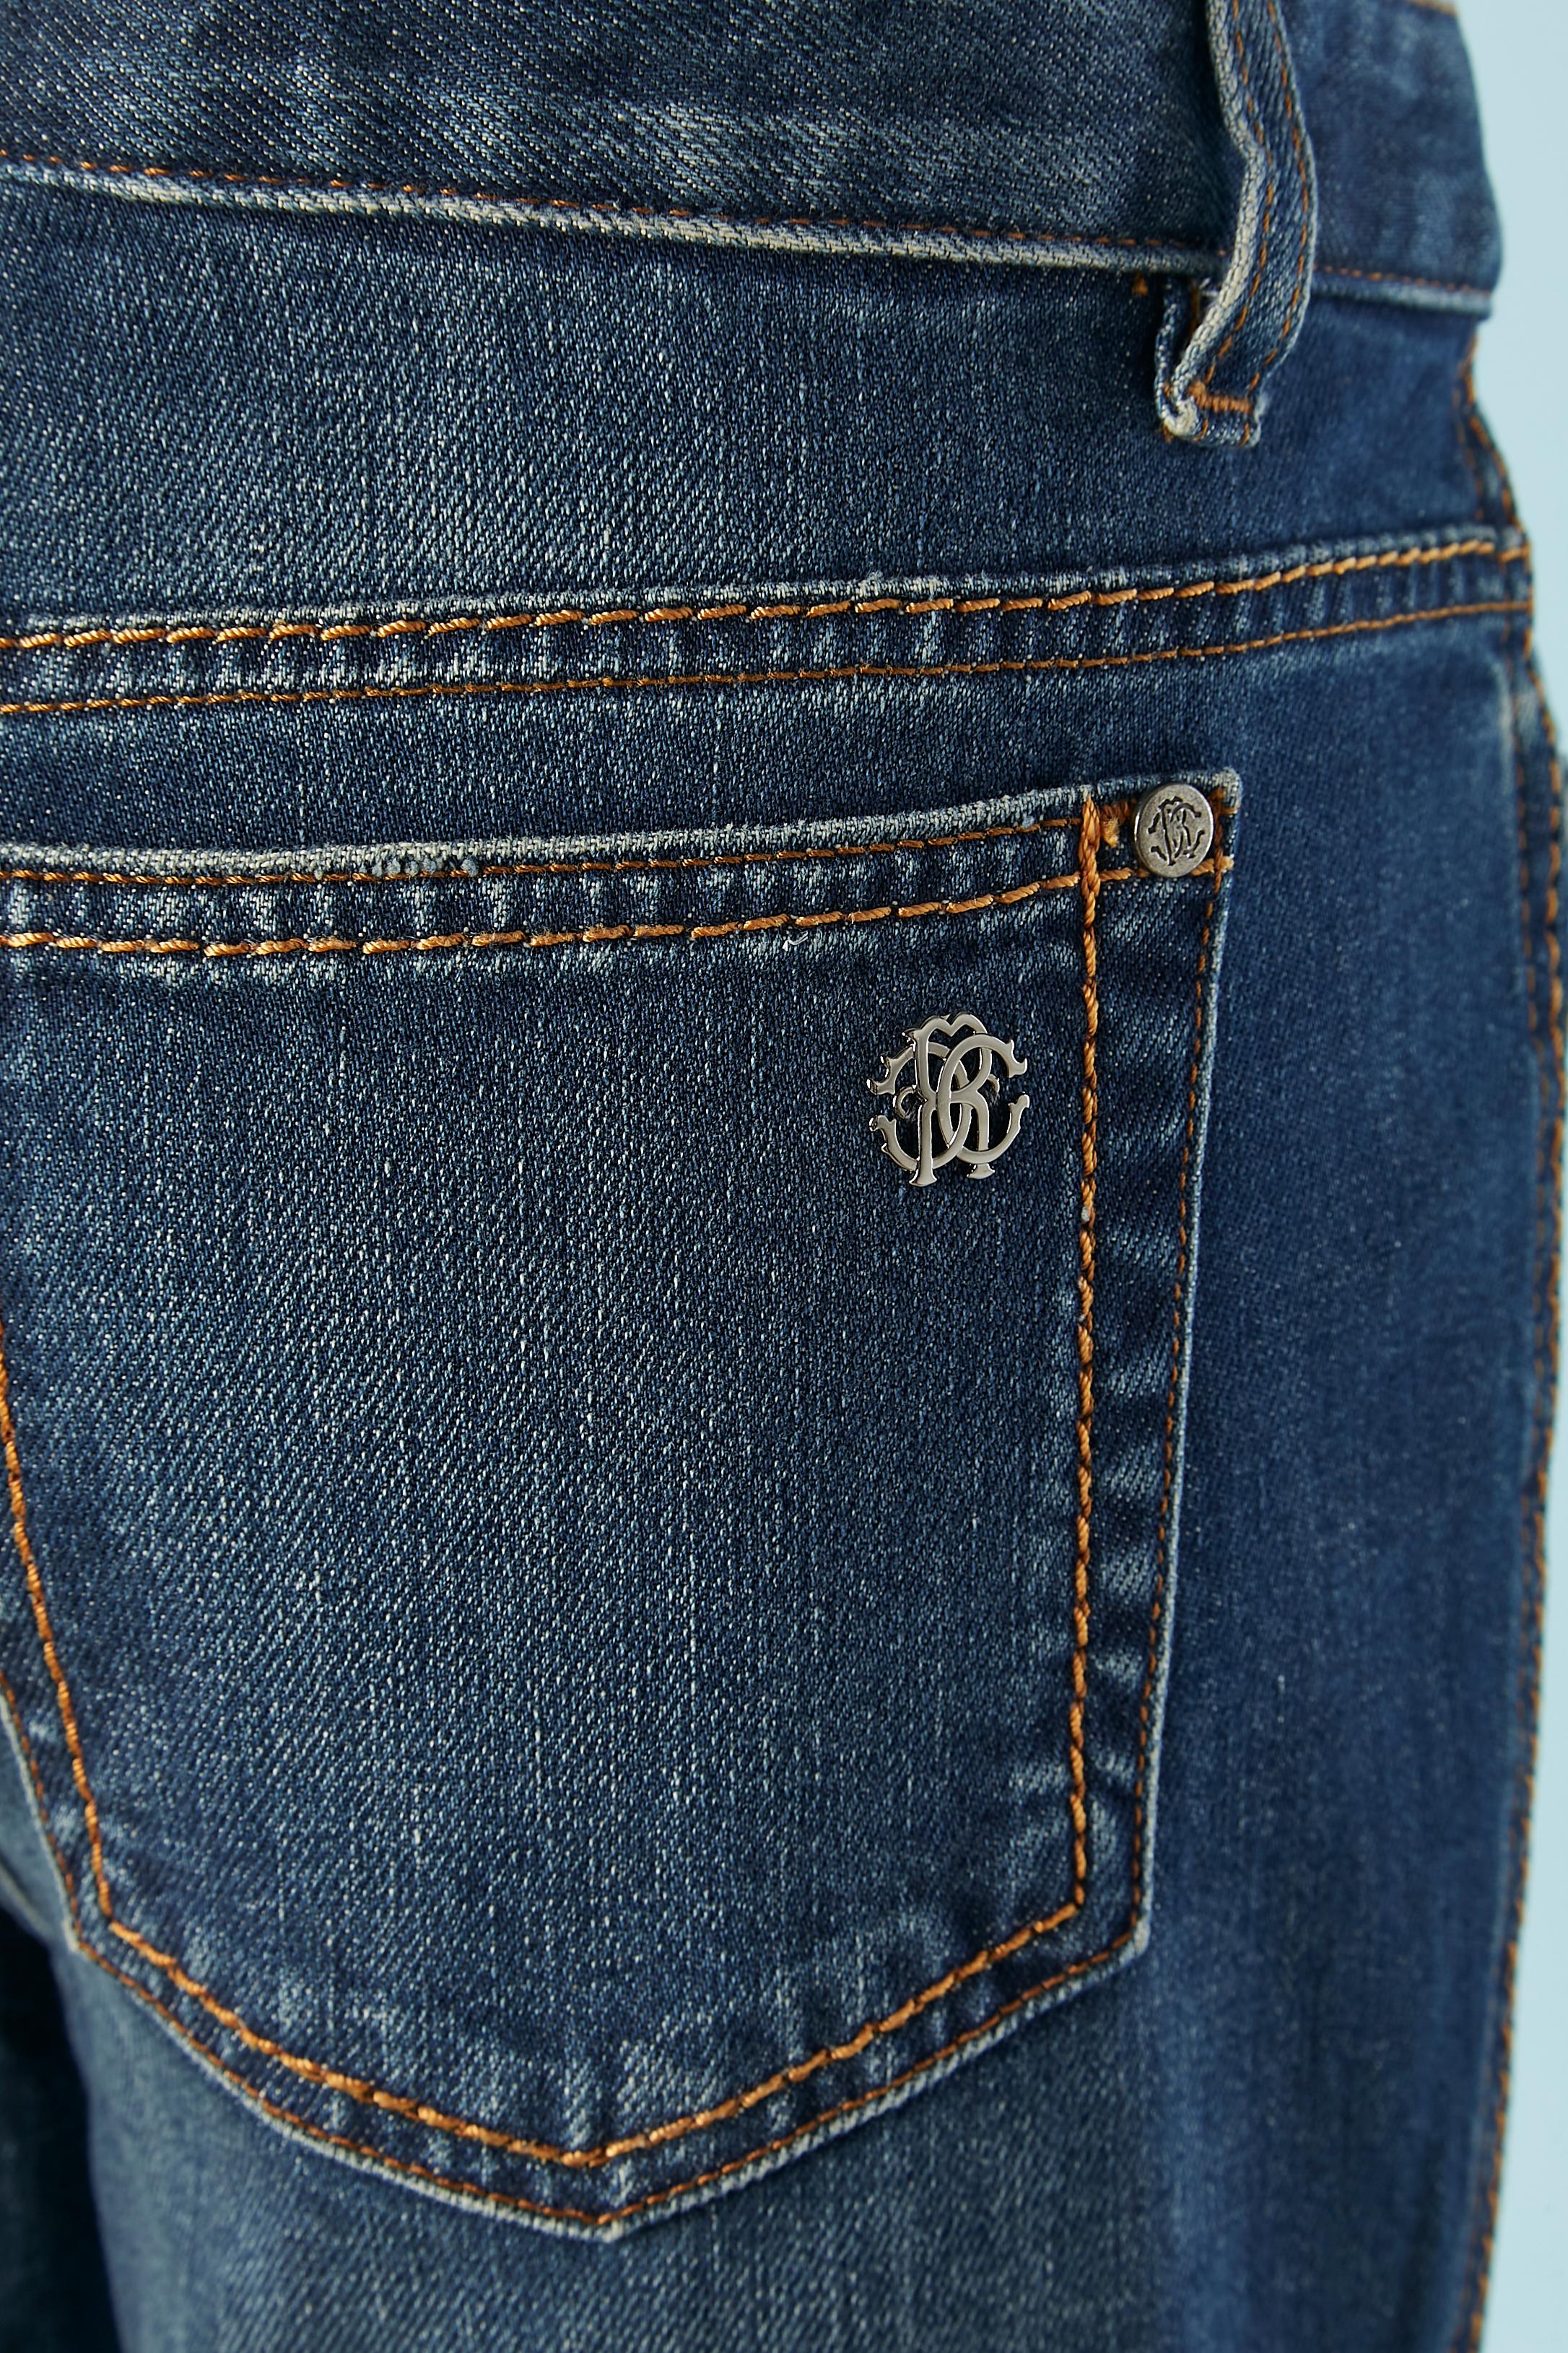 Blue denim jeans with metallic studs and eyelet on the side Roberto Cavalli Men  For Sale 2